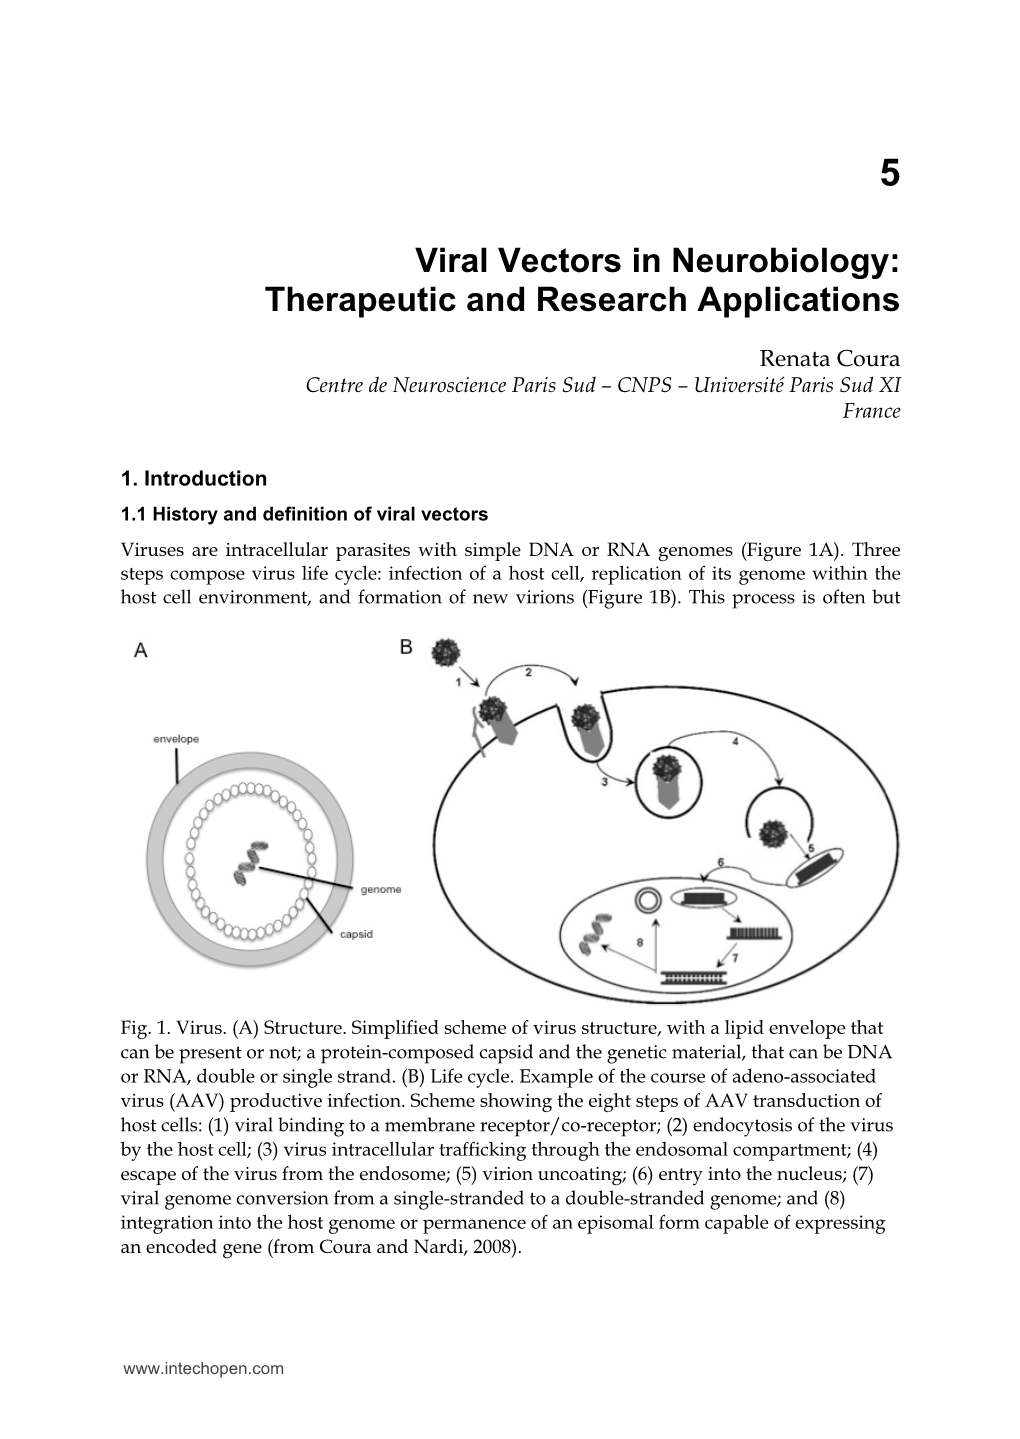 Viral Vectors in Neurobiology: Therapeutic and Research Applications